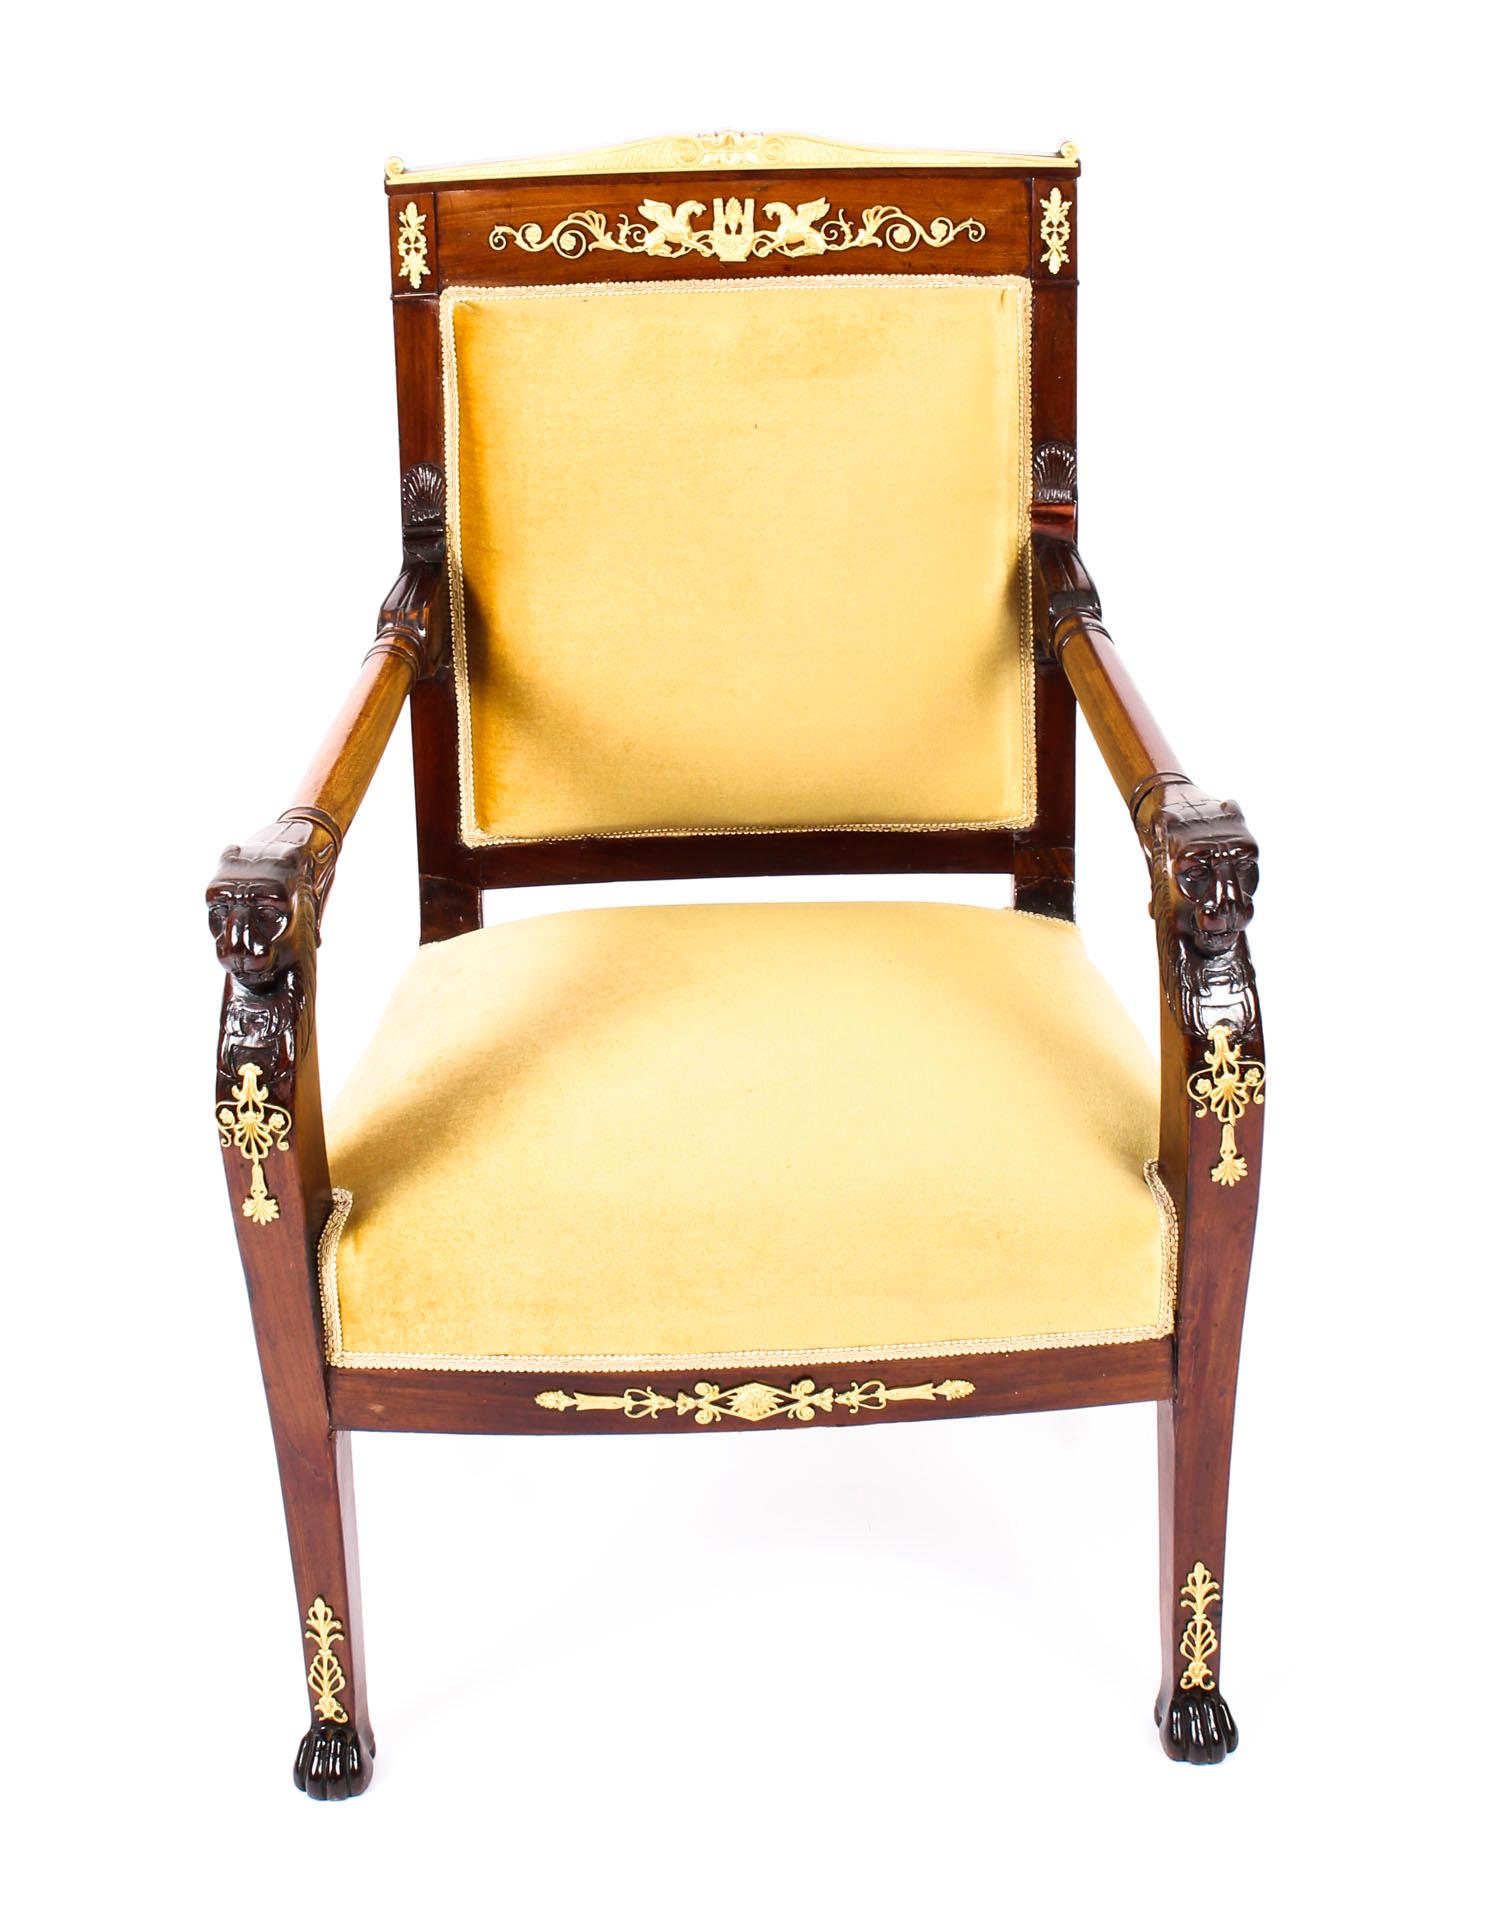 This is a splendid early 19th century French Empire mahogany armchair with ormolu mounts and raised on square tapered legs that terminate in carved paw feet.

The mahogany is exceptionally beautiful in colour and has been embellished with striking